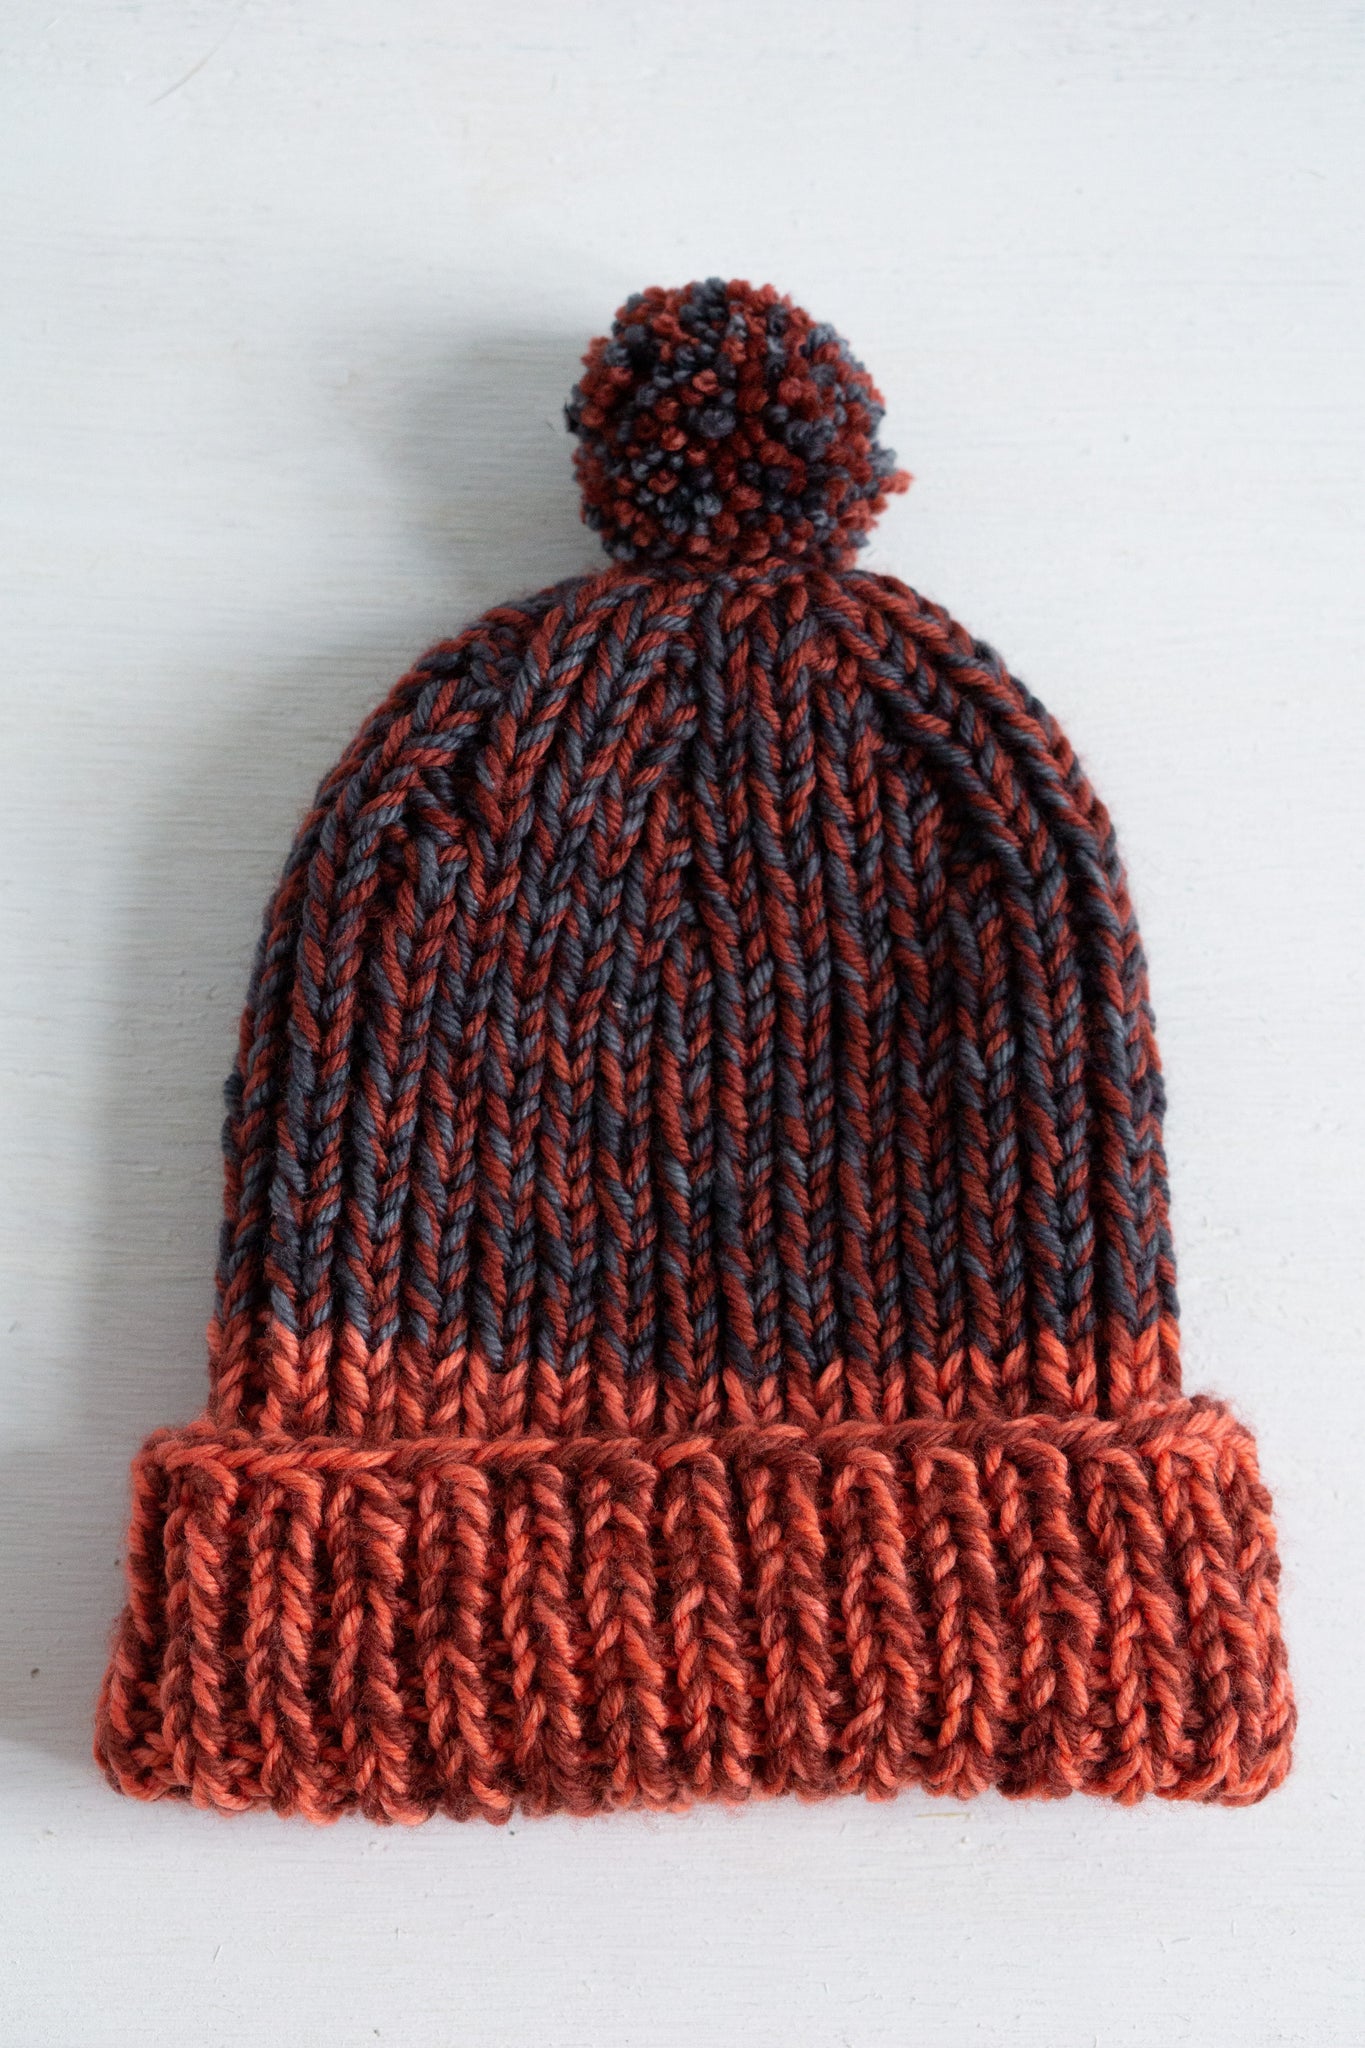 Knit a simple ribbed toque